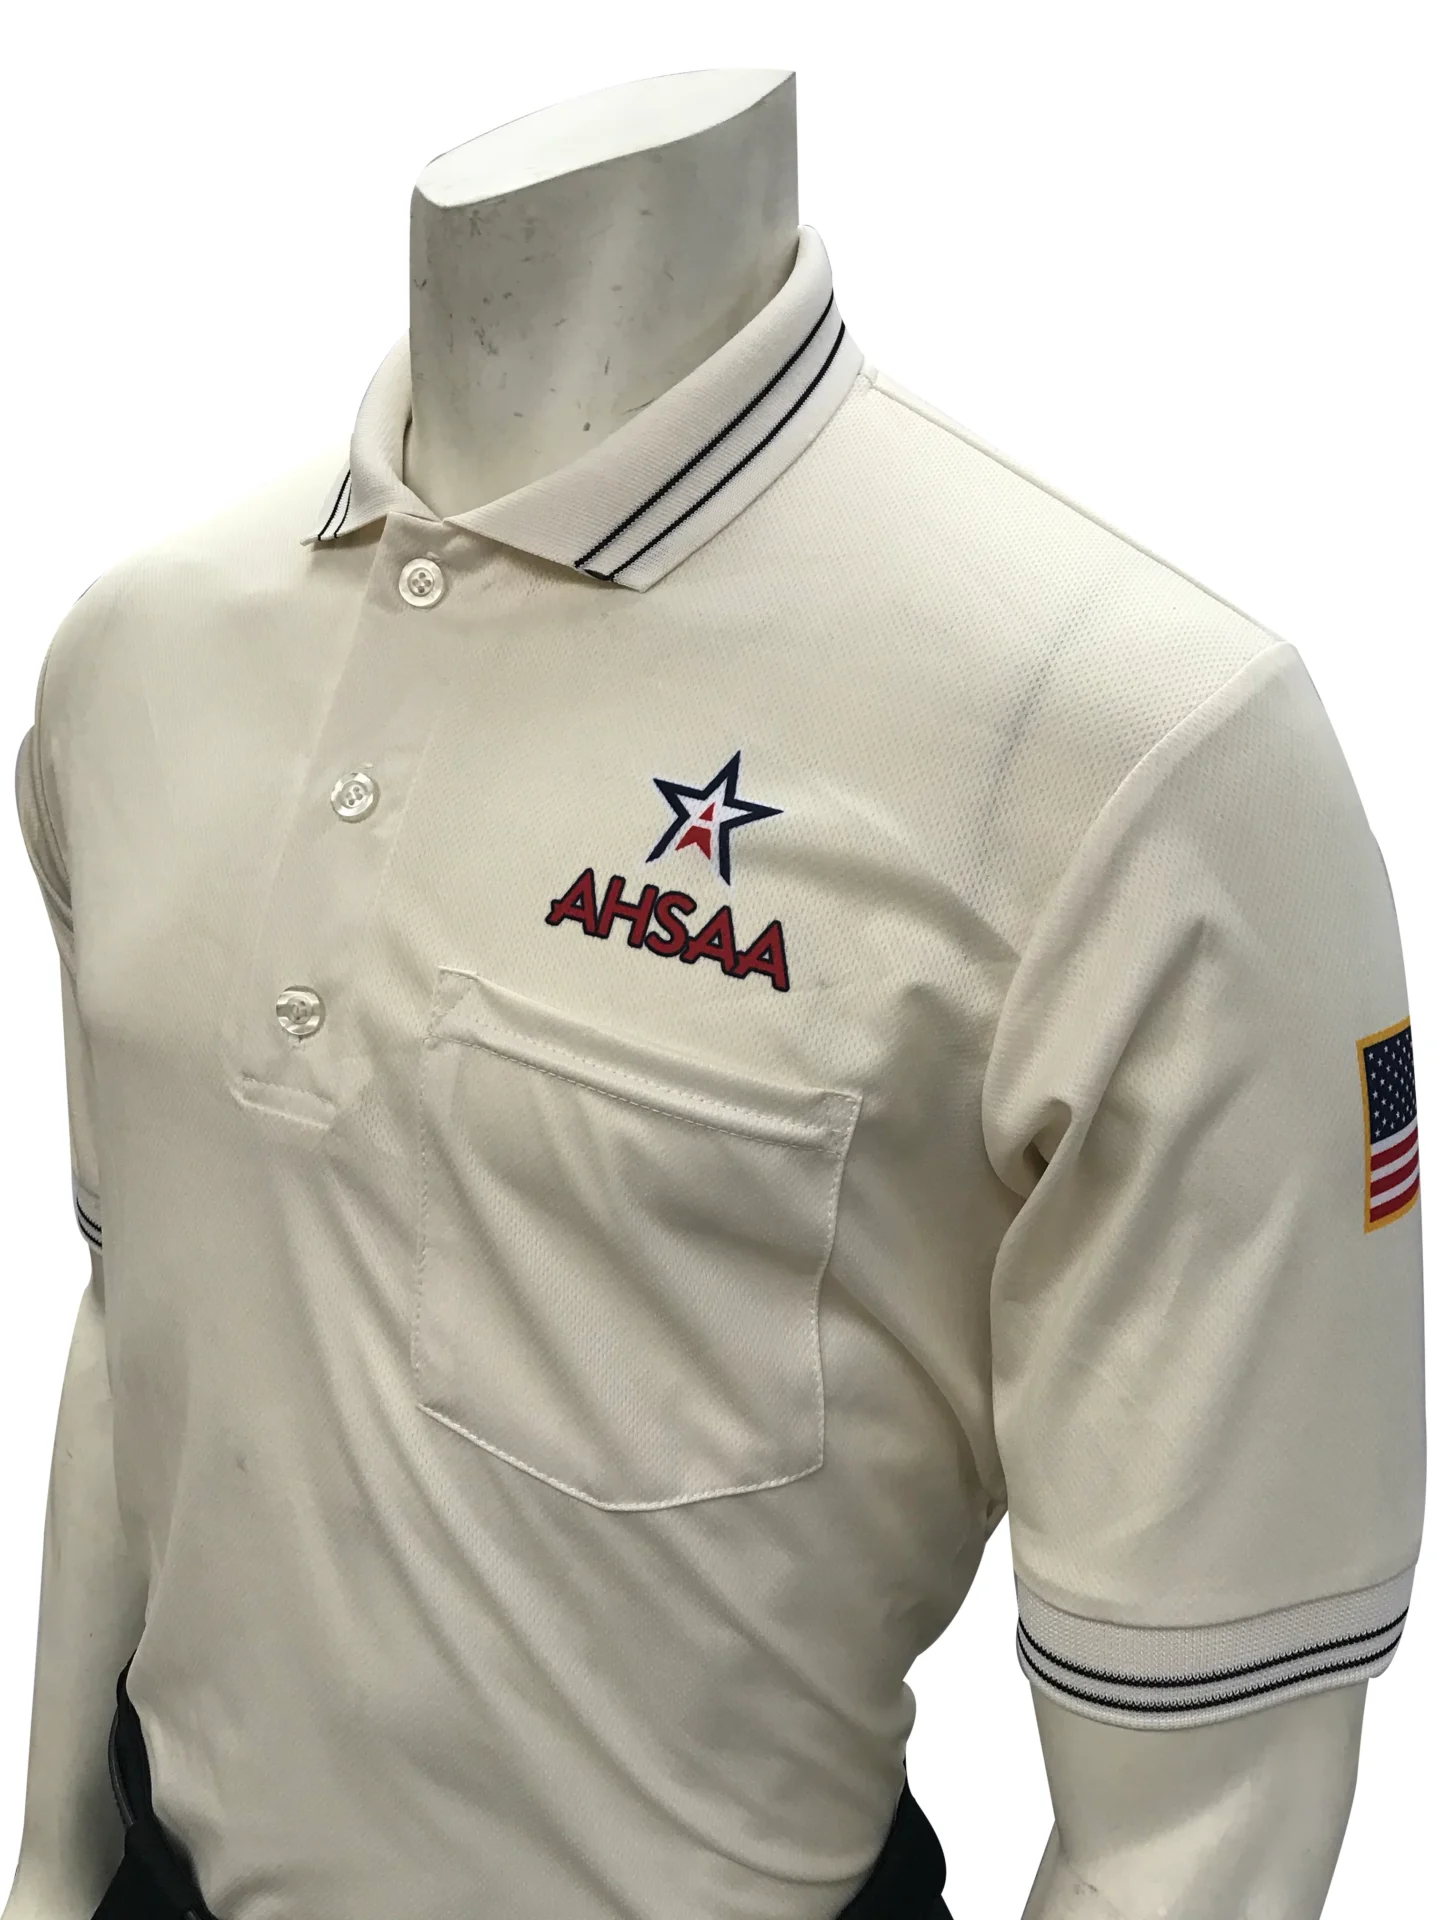 A white shirt with an american flag on the chest.